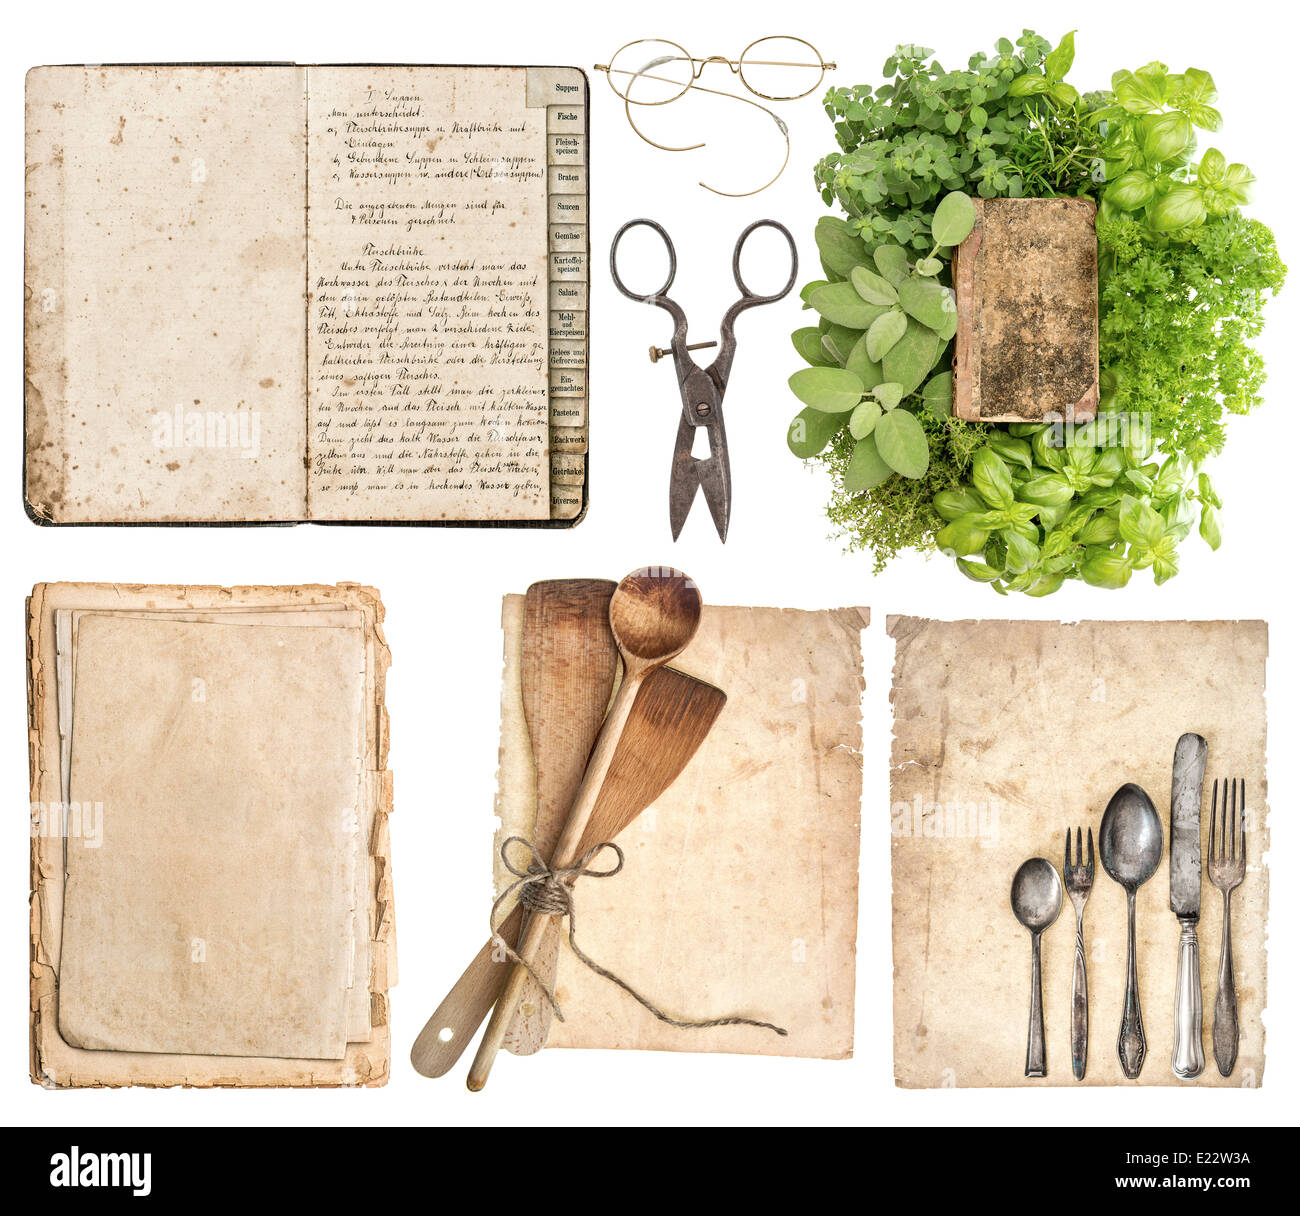 Old wooden kitchen utensils, antique cookbook, aged paper pages and herbs isolated on white background. Stock Photo